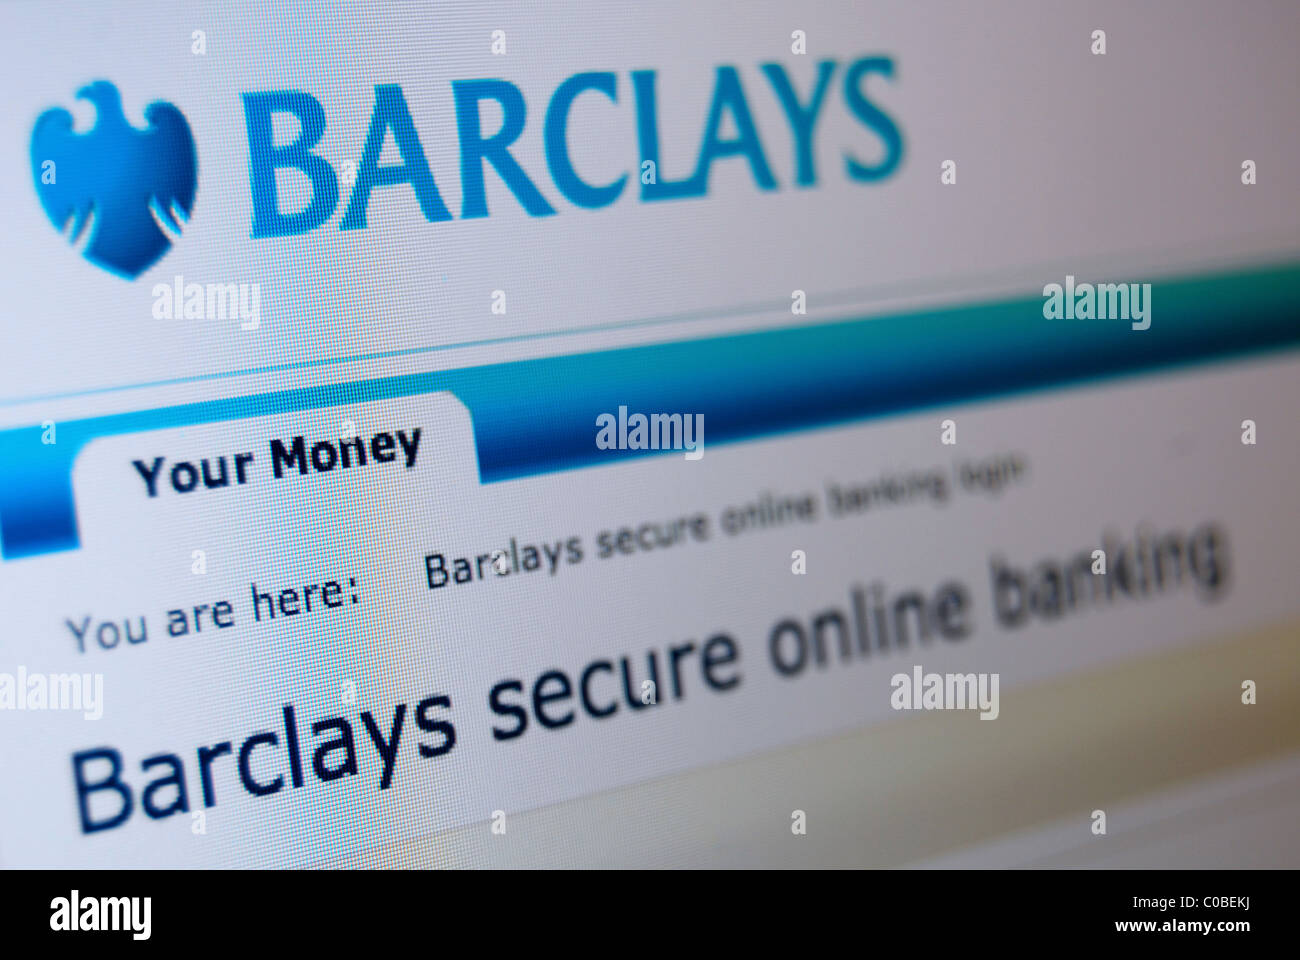 A Photo Illustration Of The Barclays Bank Website Stock Photo